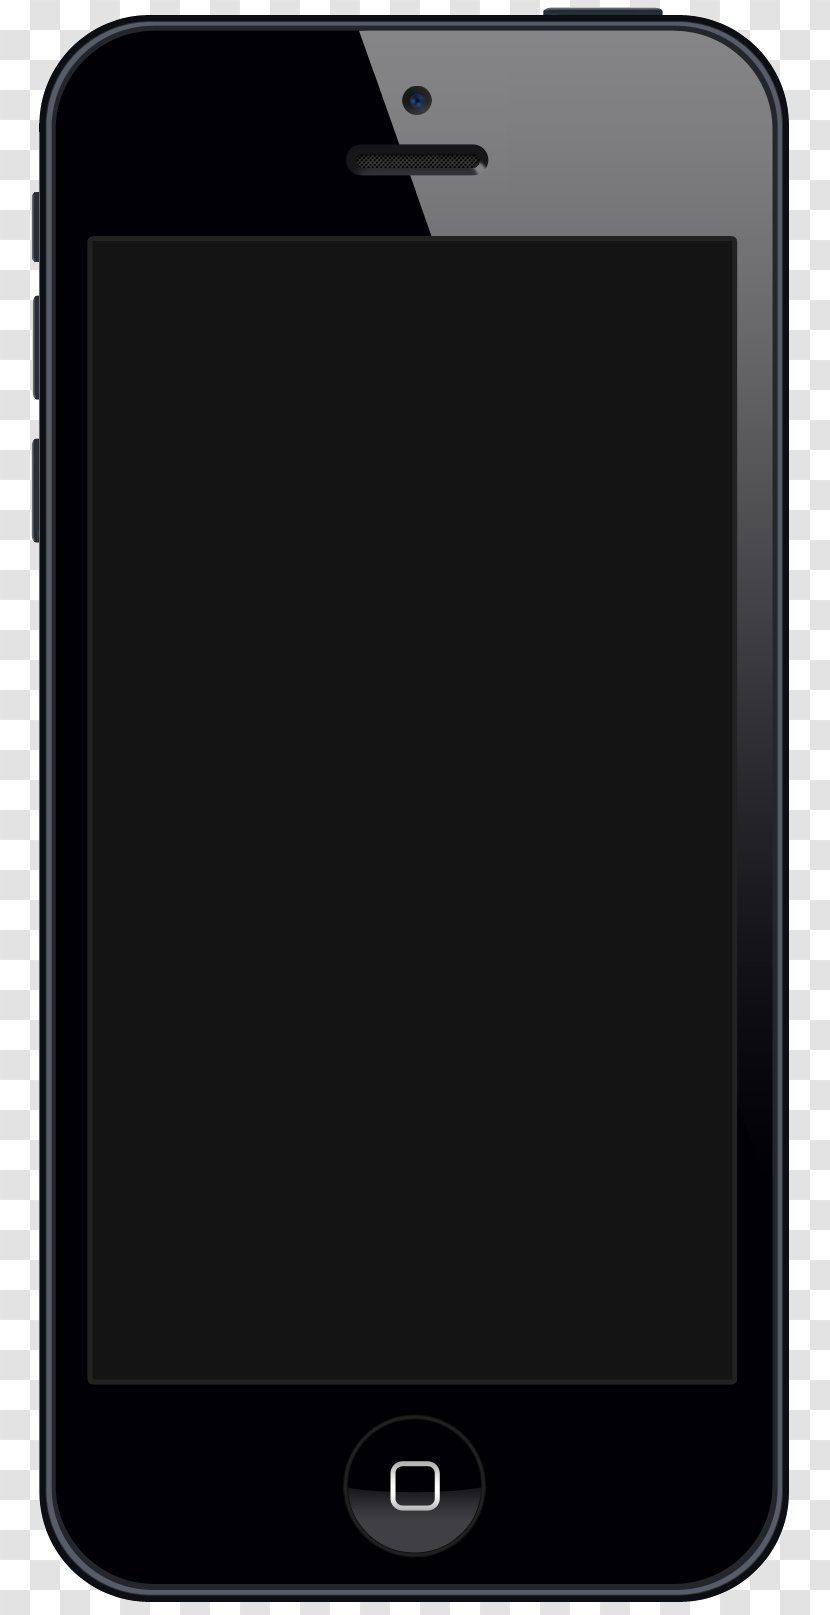 IPhone 4S 5c 7 - Communication Device - High Resolution Iphone Icon Transparent PNG